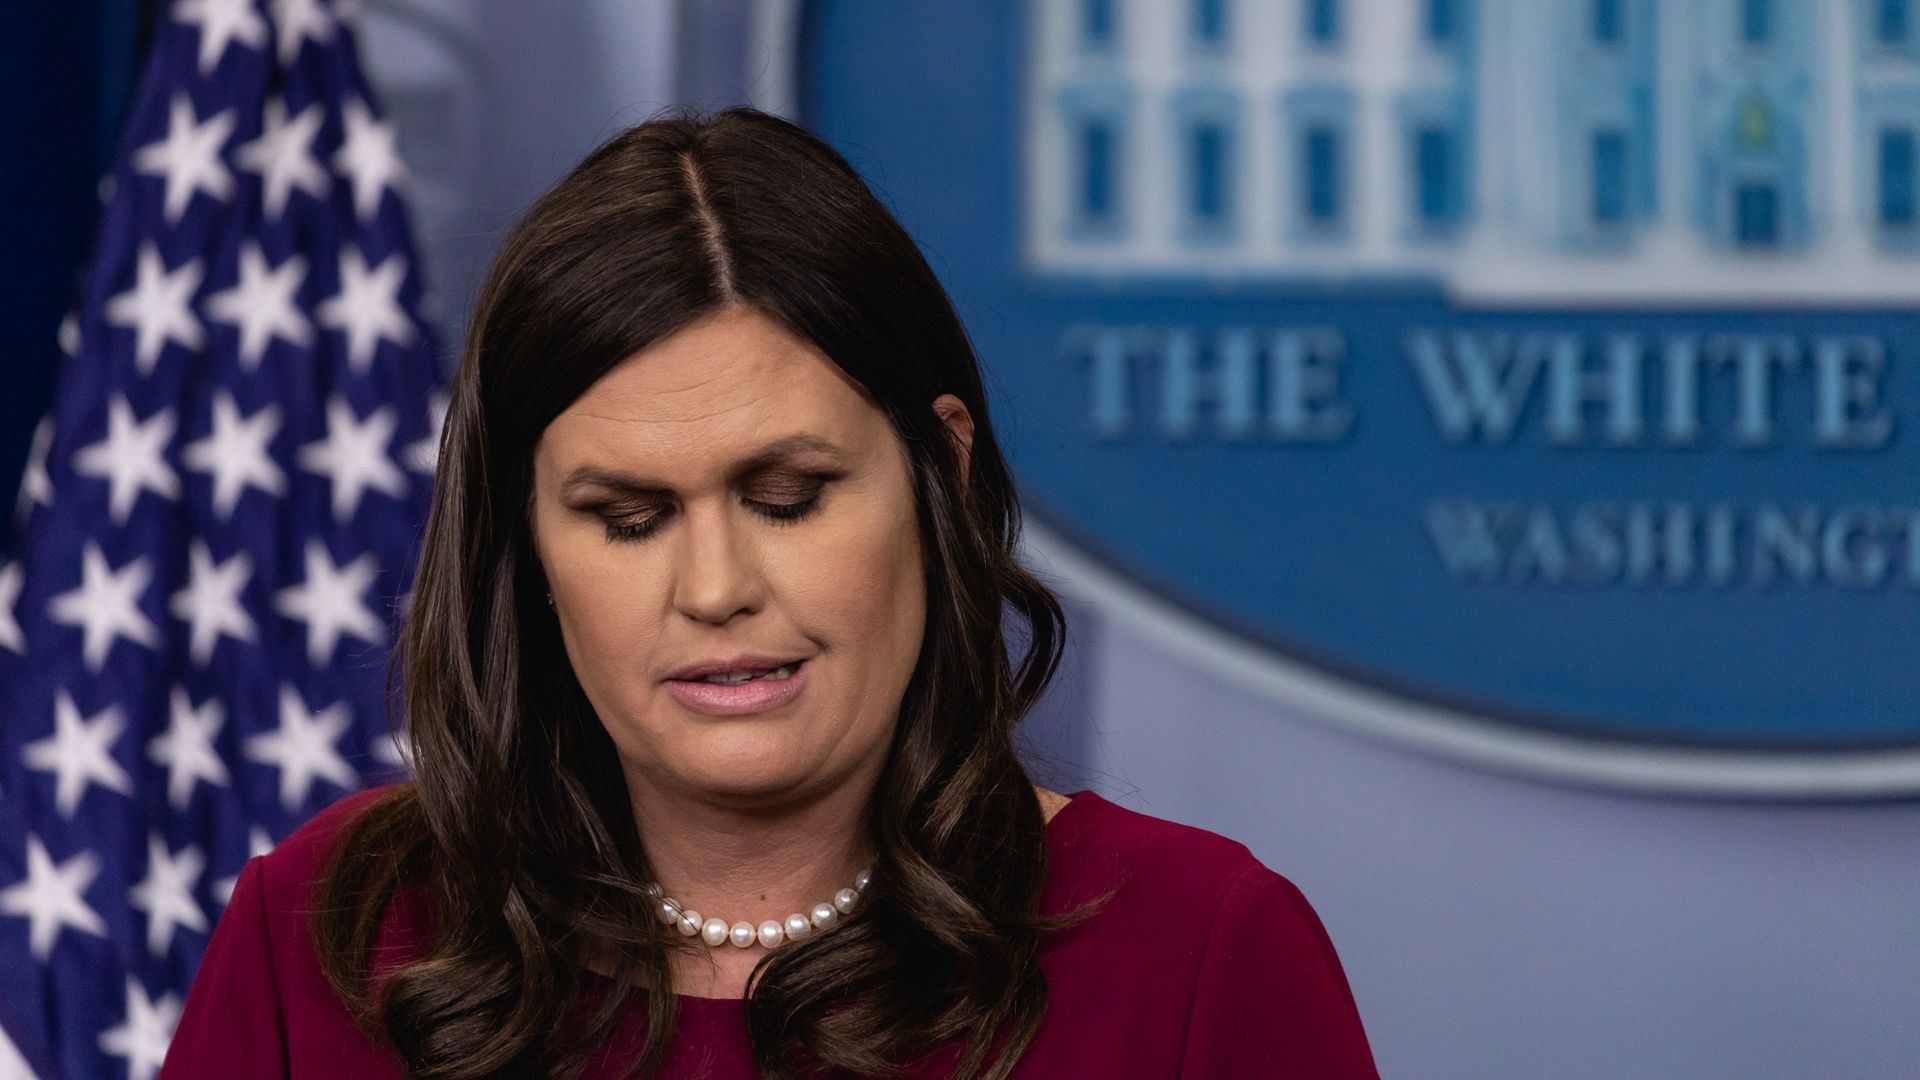 Sarah Sanders delivers the White House press briefing.